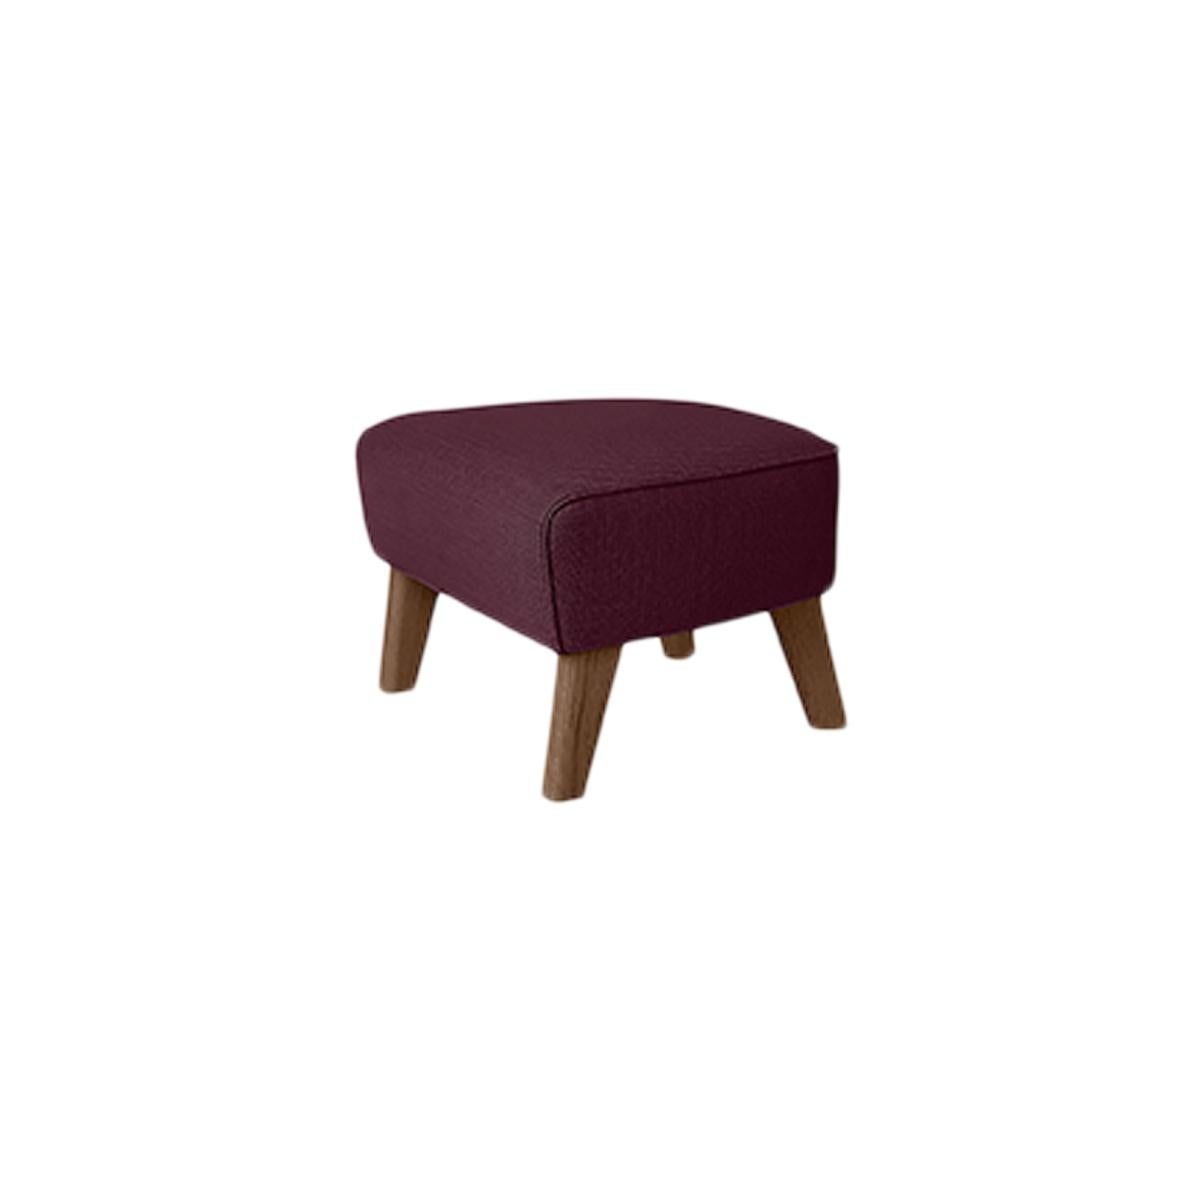 Maroon and smoked oak Raf Simons Vidar 3 My Own Chair Footstool by Lassen
Dimensions: W 56 x D 58 x H 40 cm 
Materials: Textile
Also available: Other colors available,

The My Own Chair Footstool has been designed in the same spirit as Flemming